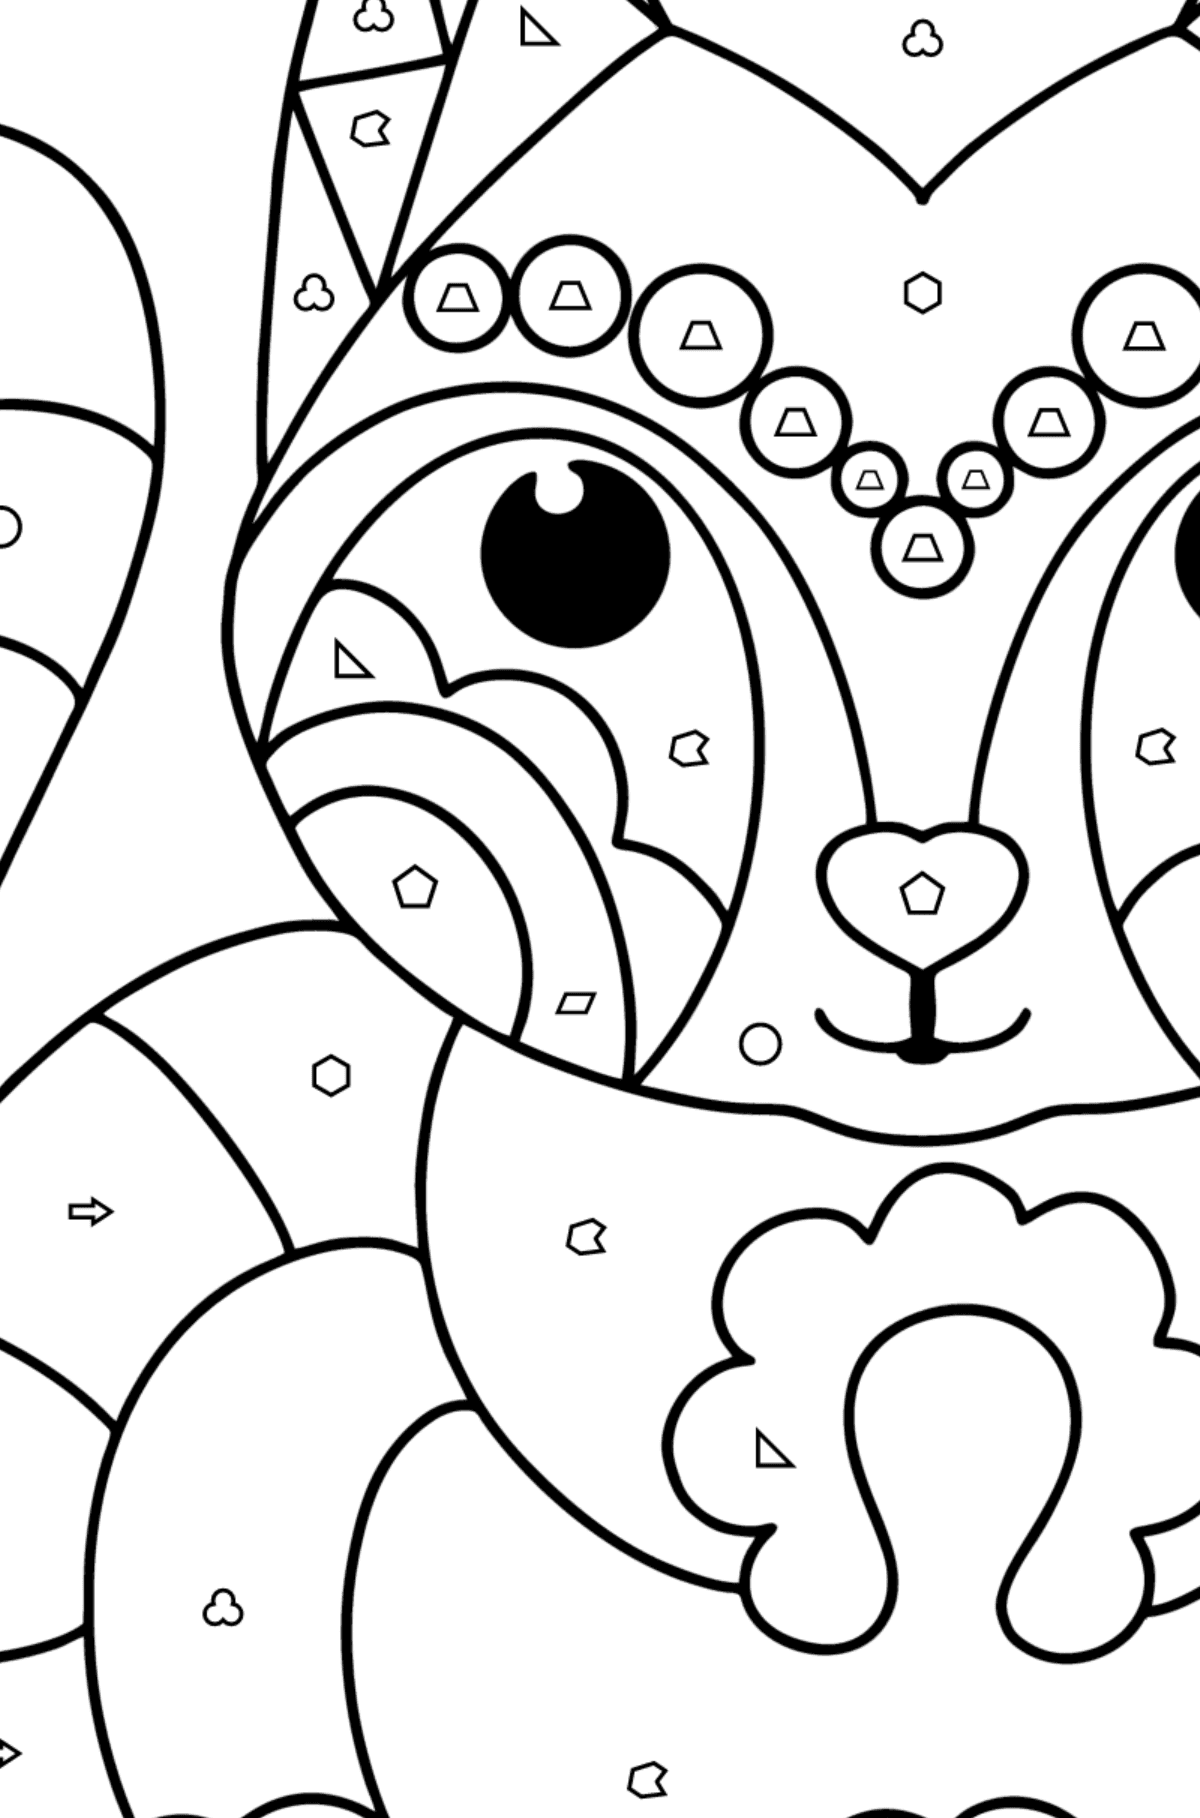 Coloring page Anti stress animals - raccoon - Coloring by Geometric Shapes for Kids